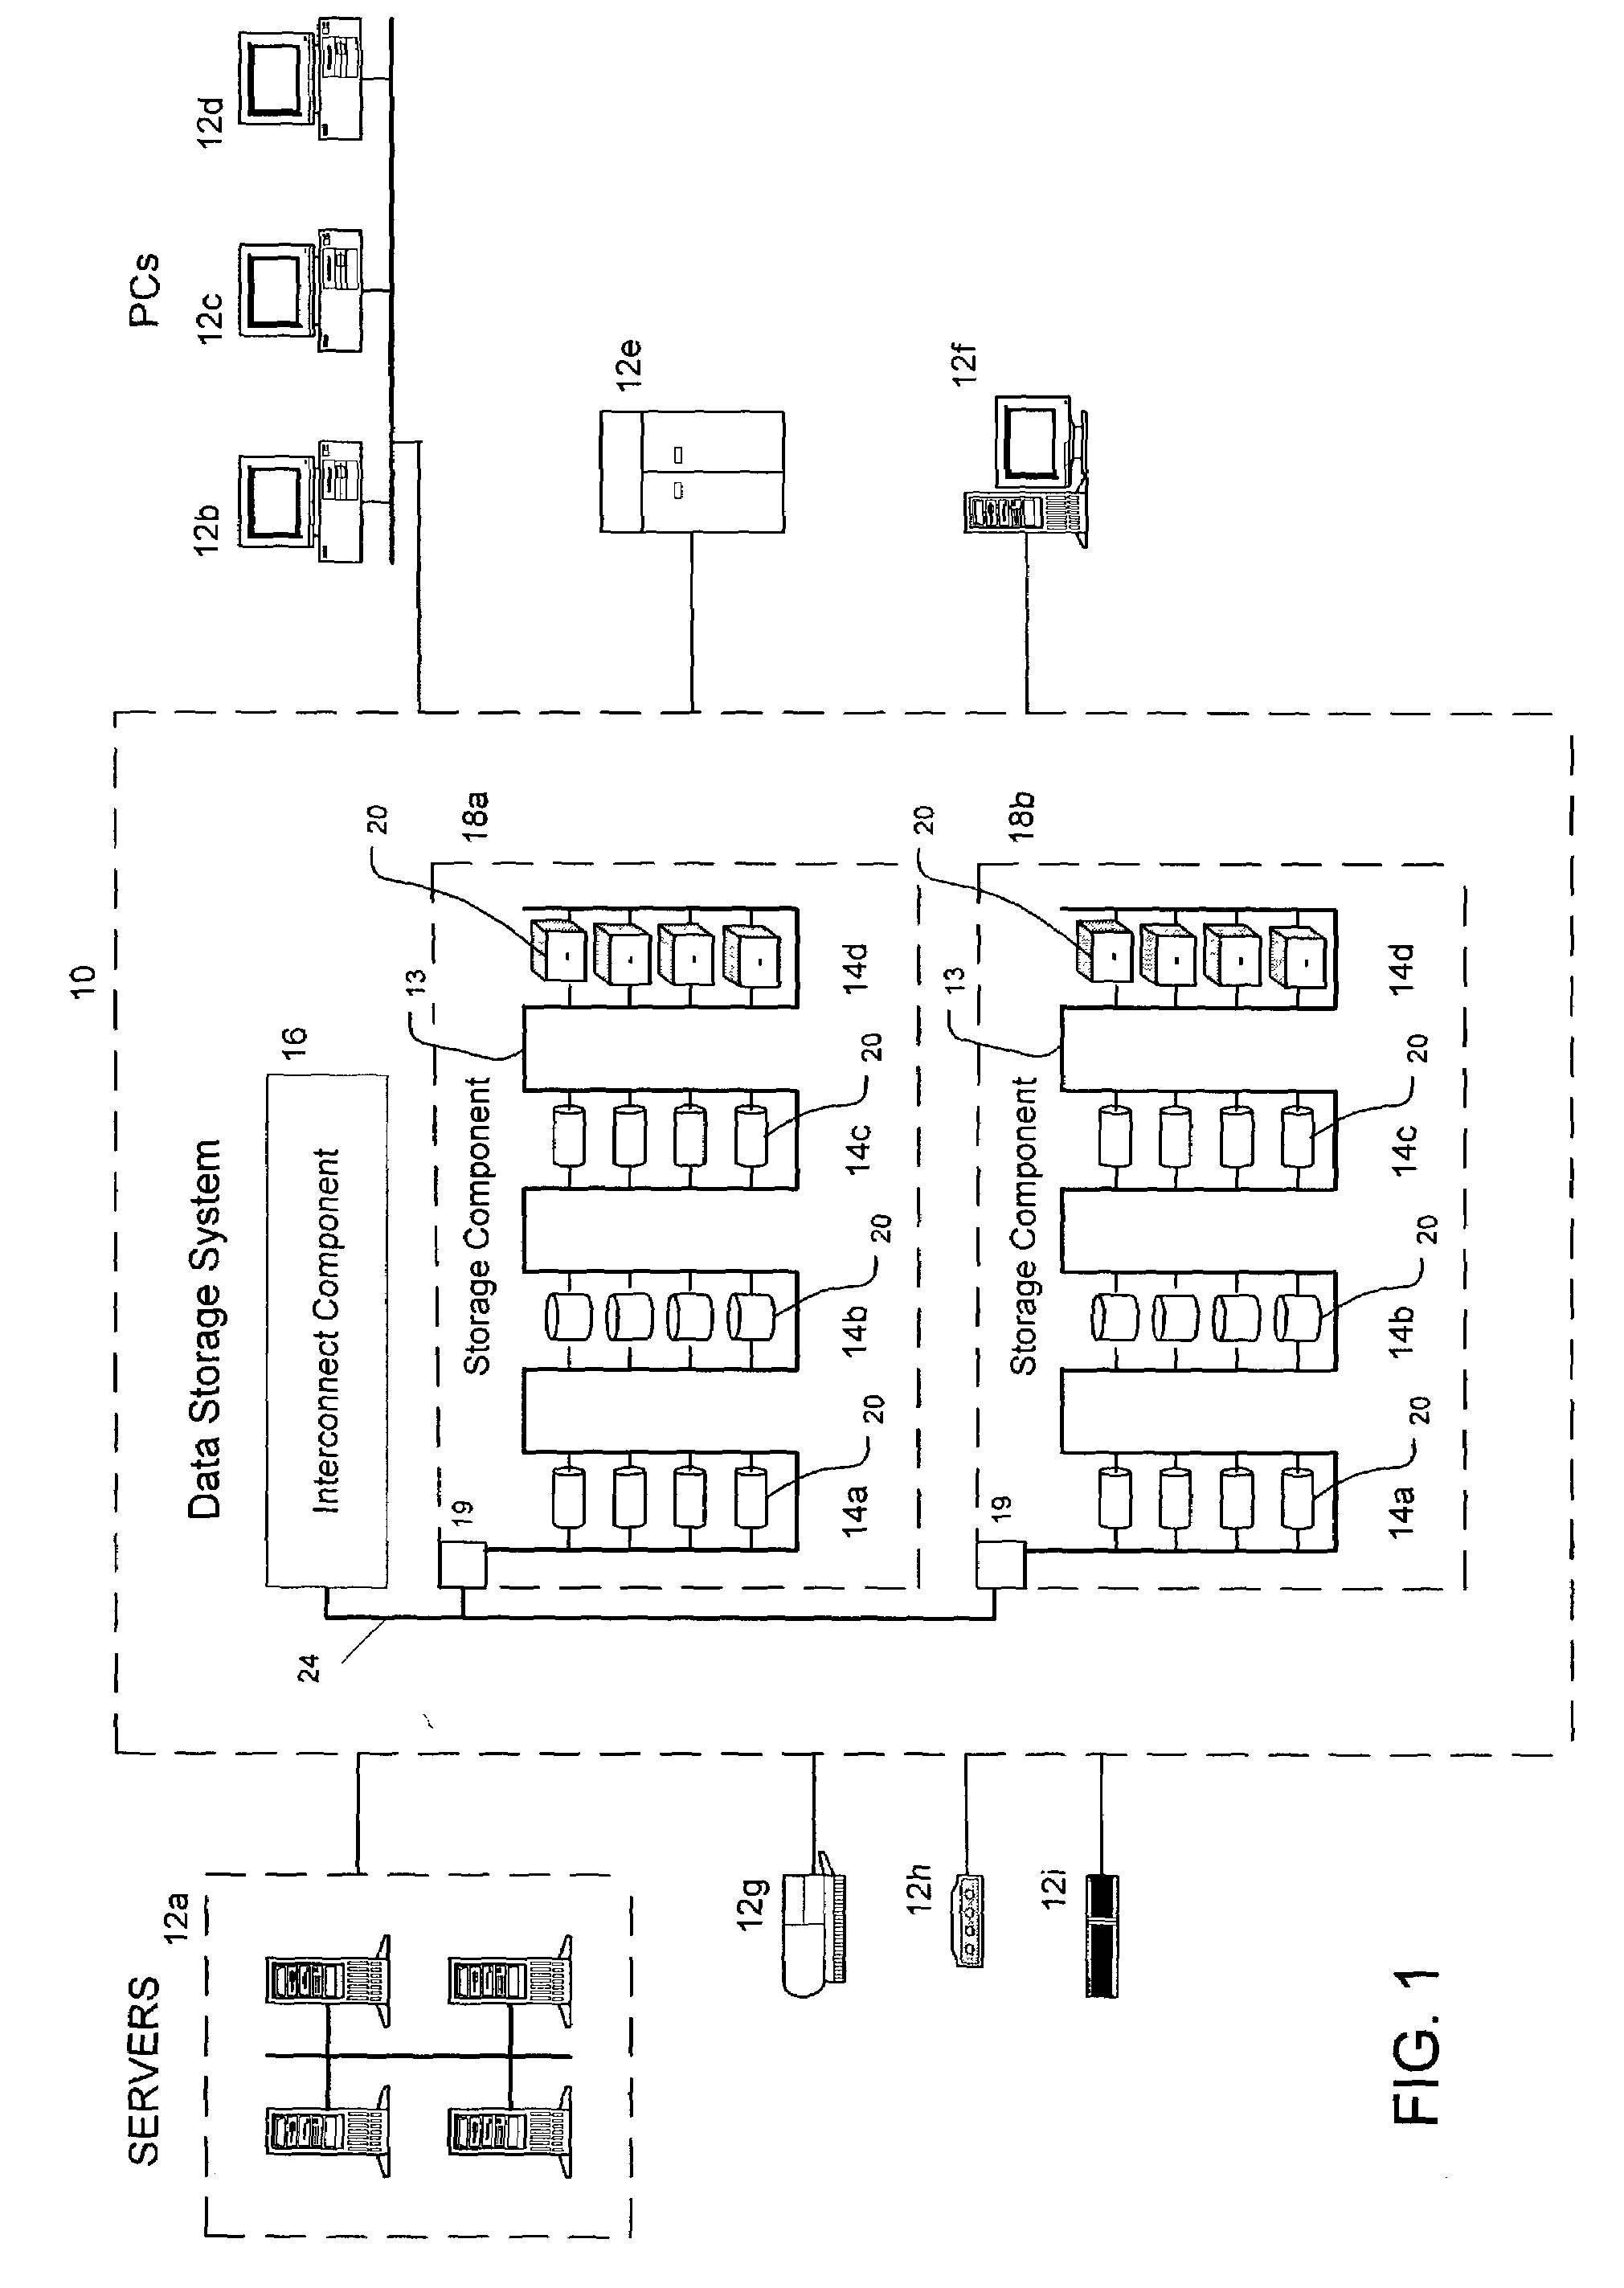 Preventing damage of storage devices and data loss in a data storage system